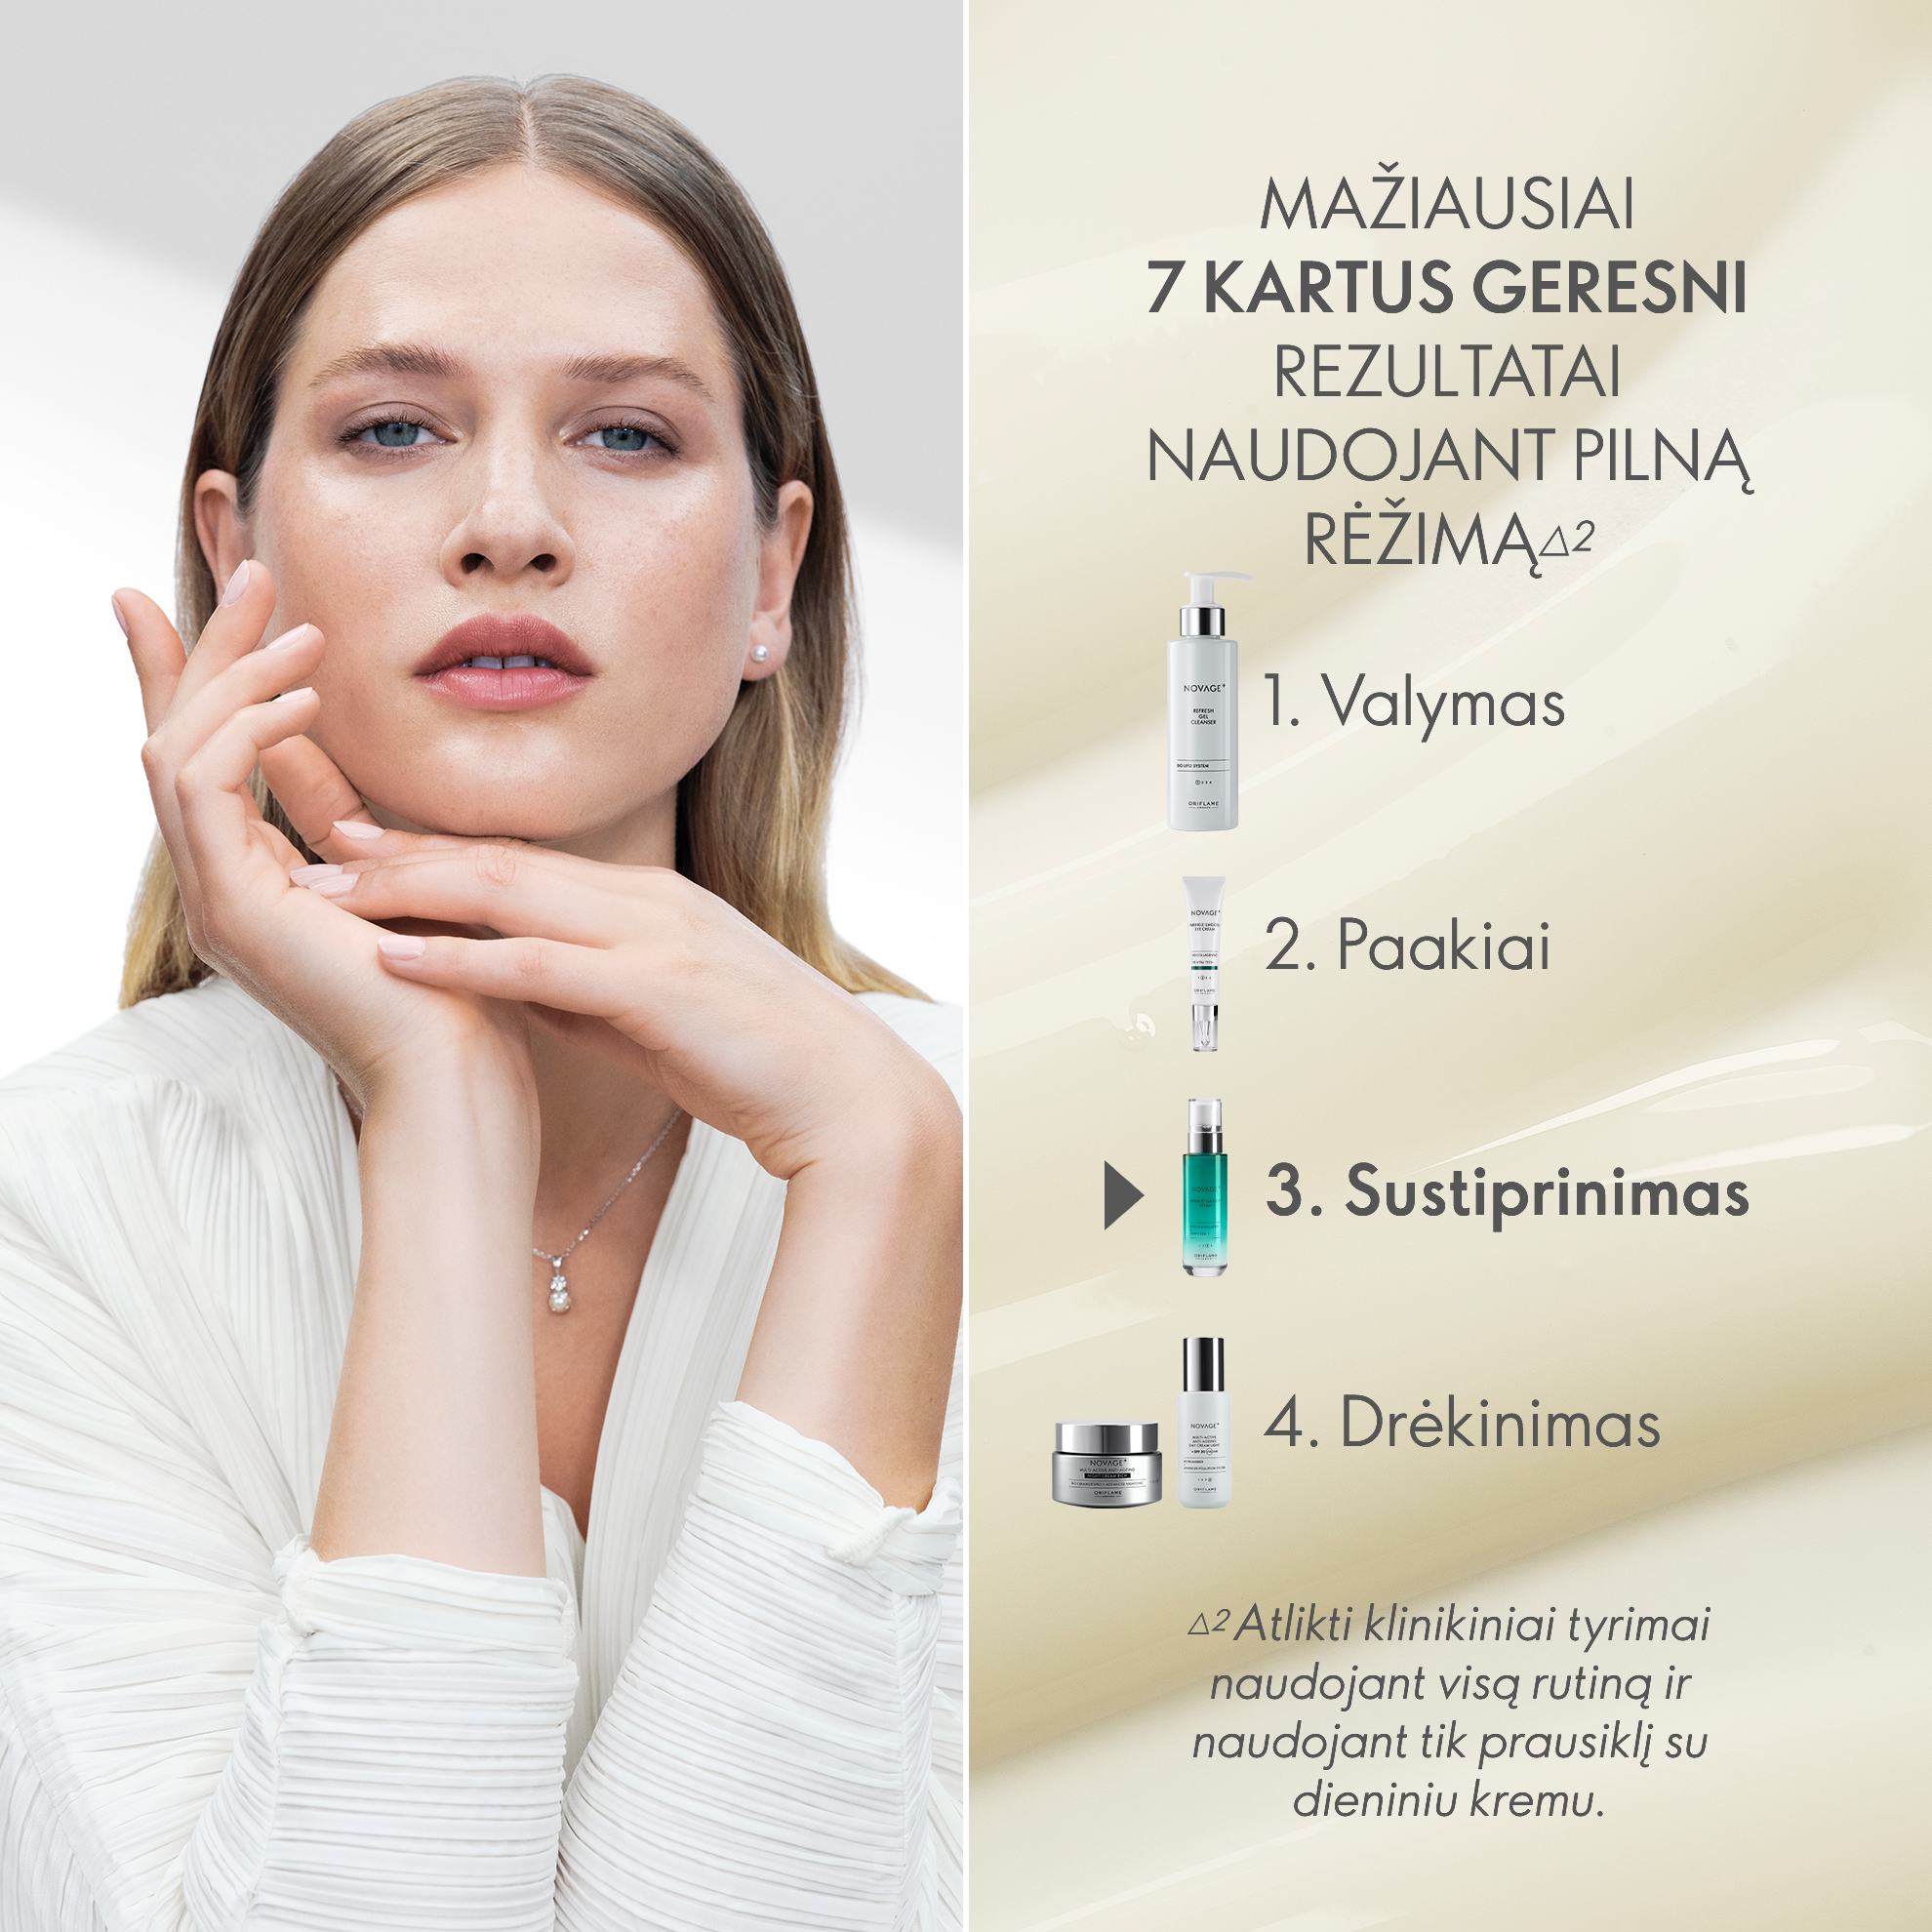 https://media-cdn.oriflame.com/productImage?externalMediaId=product-management-media%2fProducts%2f41035%2fLT%2f41035_4.png&id=17605383&version=2